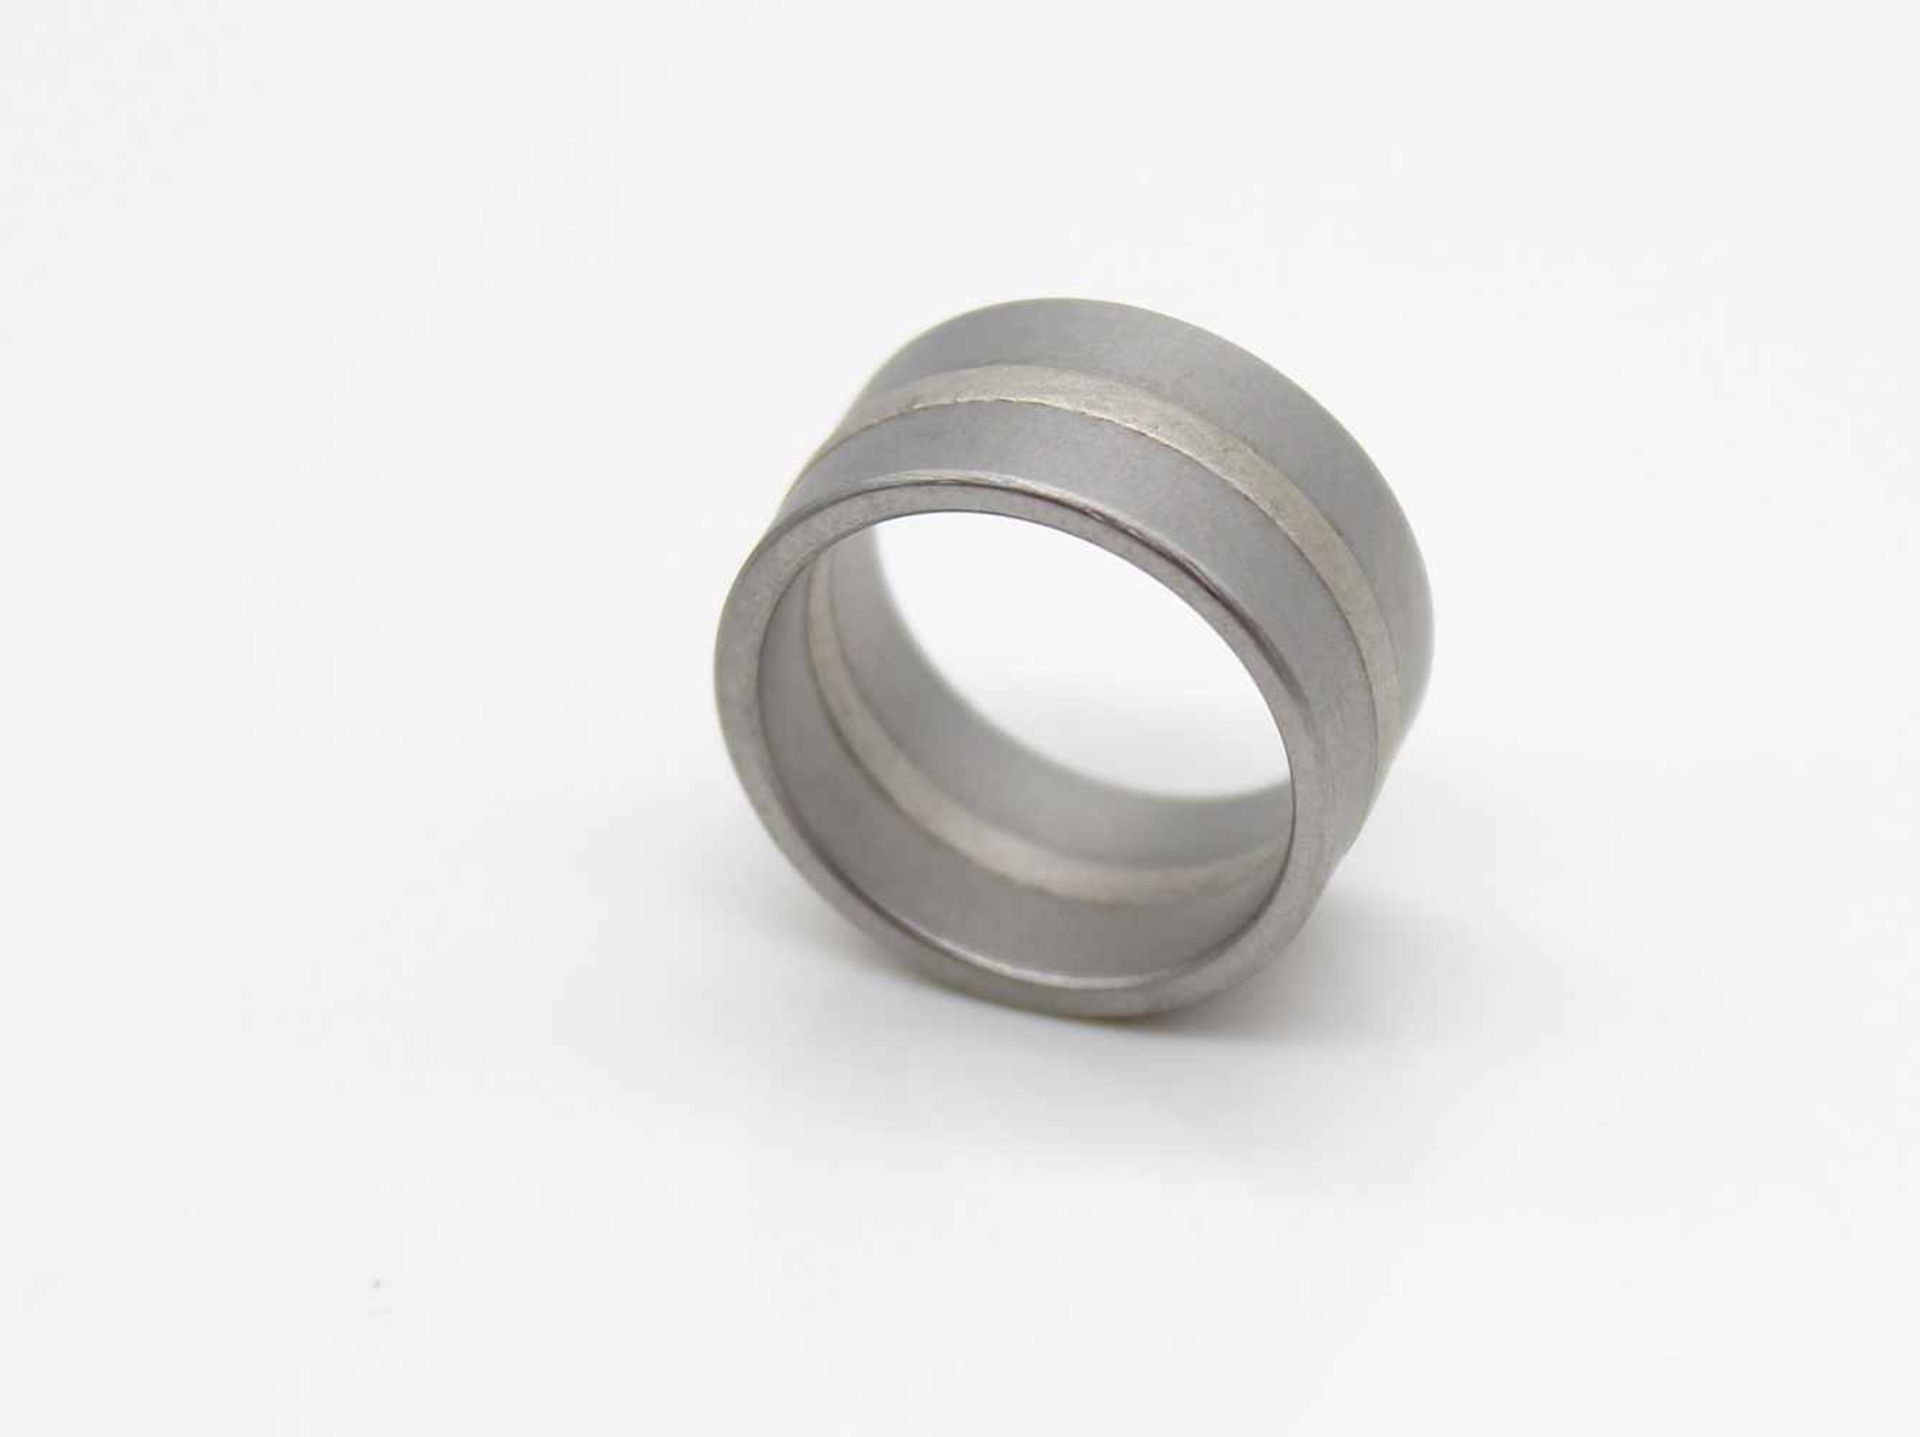 Niessing ring made of steel and 1000 platinumWeight 9.8 g, size 53. Niessing Ring aus Stahl und